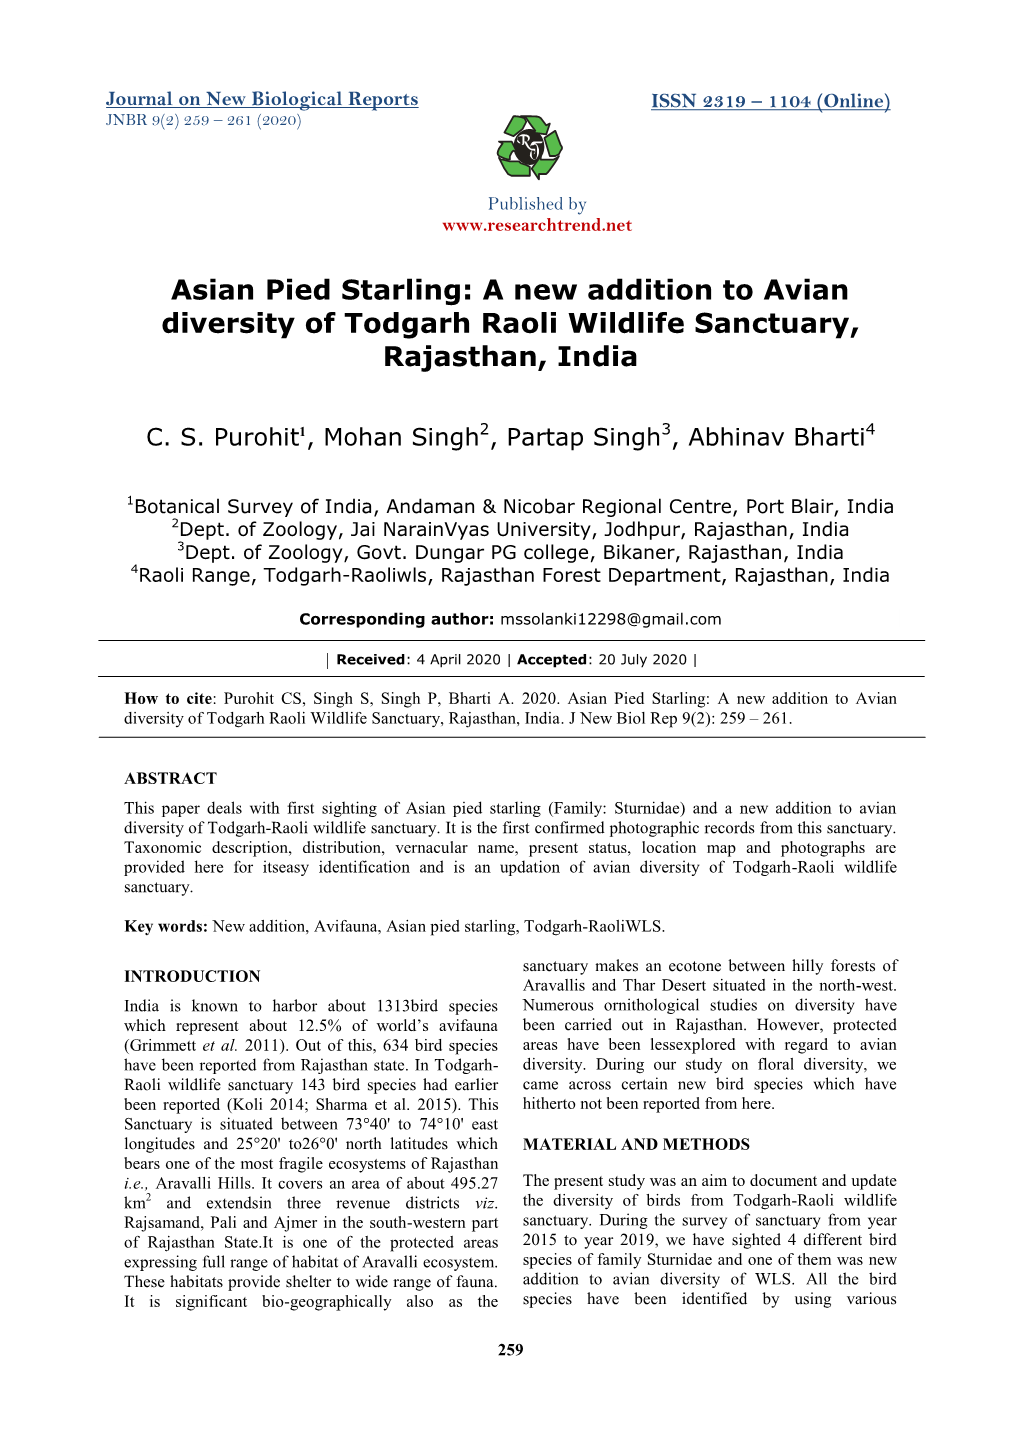 Asian Pied Starling: a New Addition to Avian Diversity of Todgarh Raoli Wildlife Sanctuary, Rajasthan, India